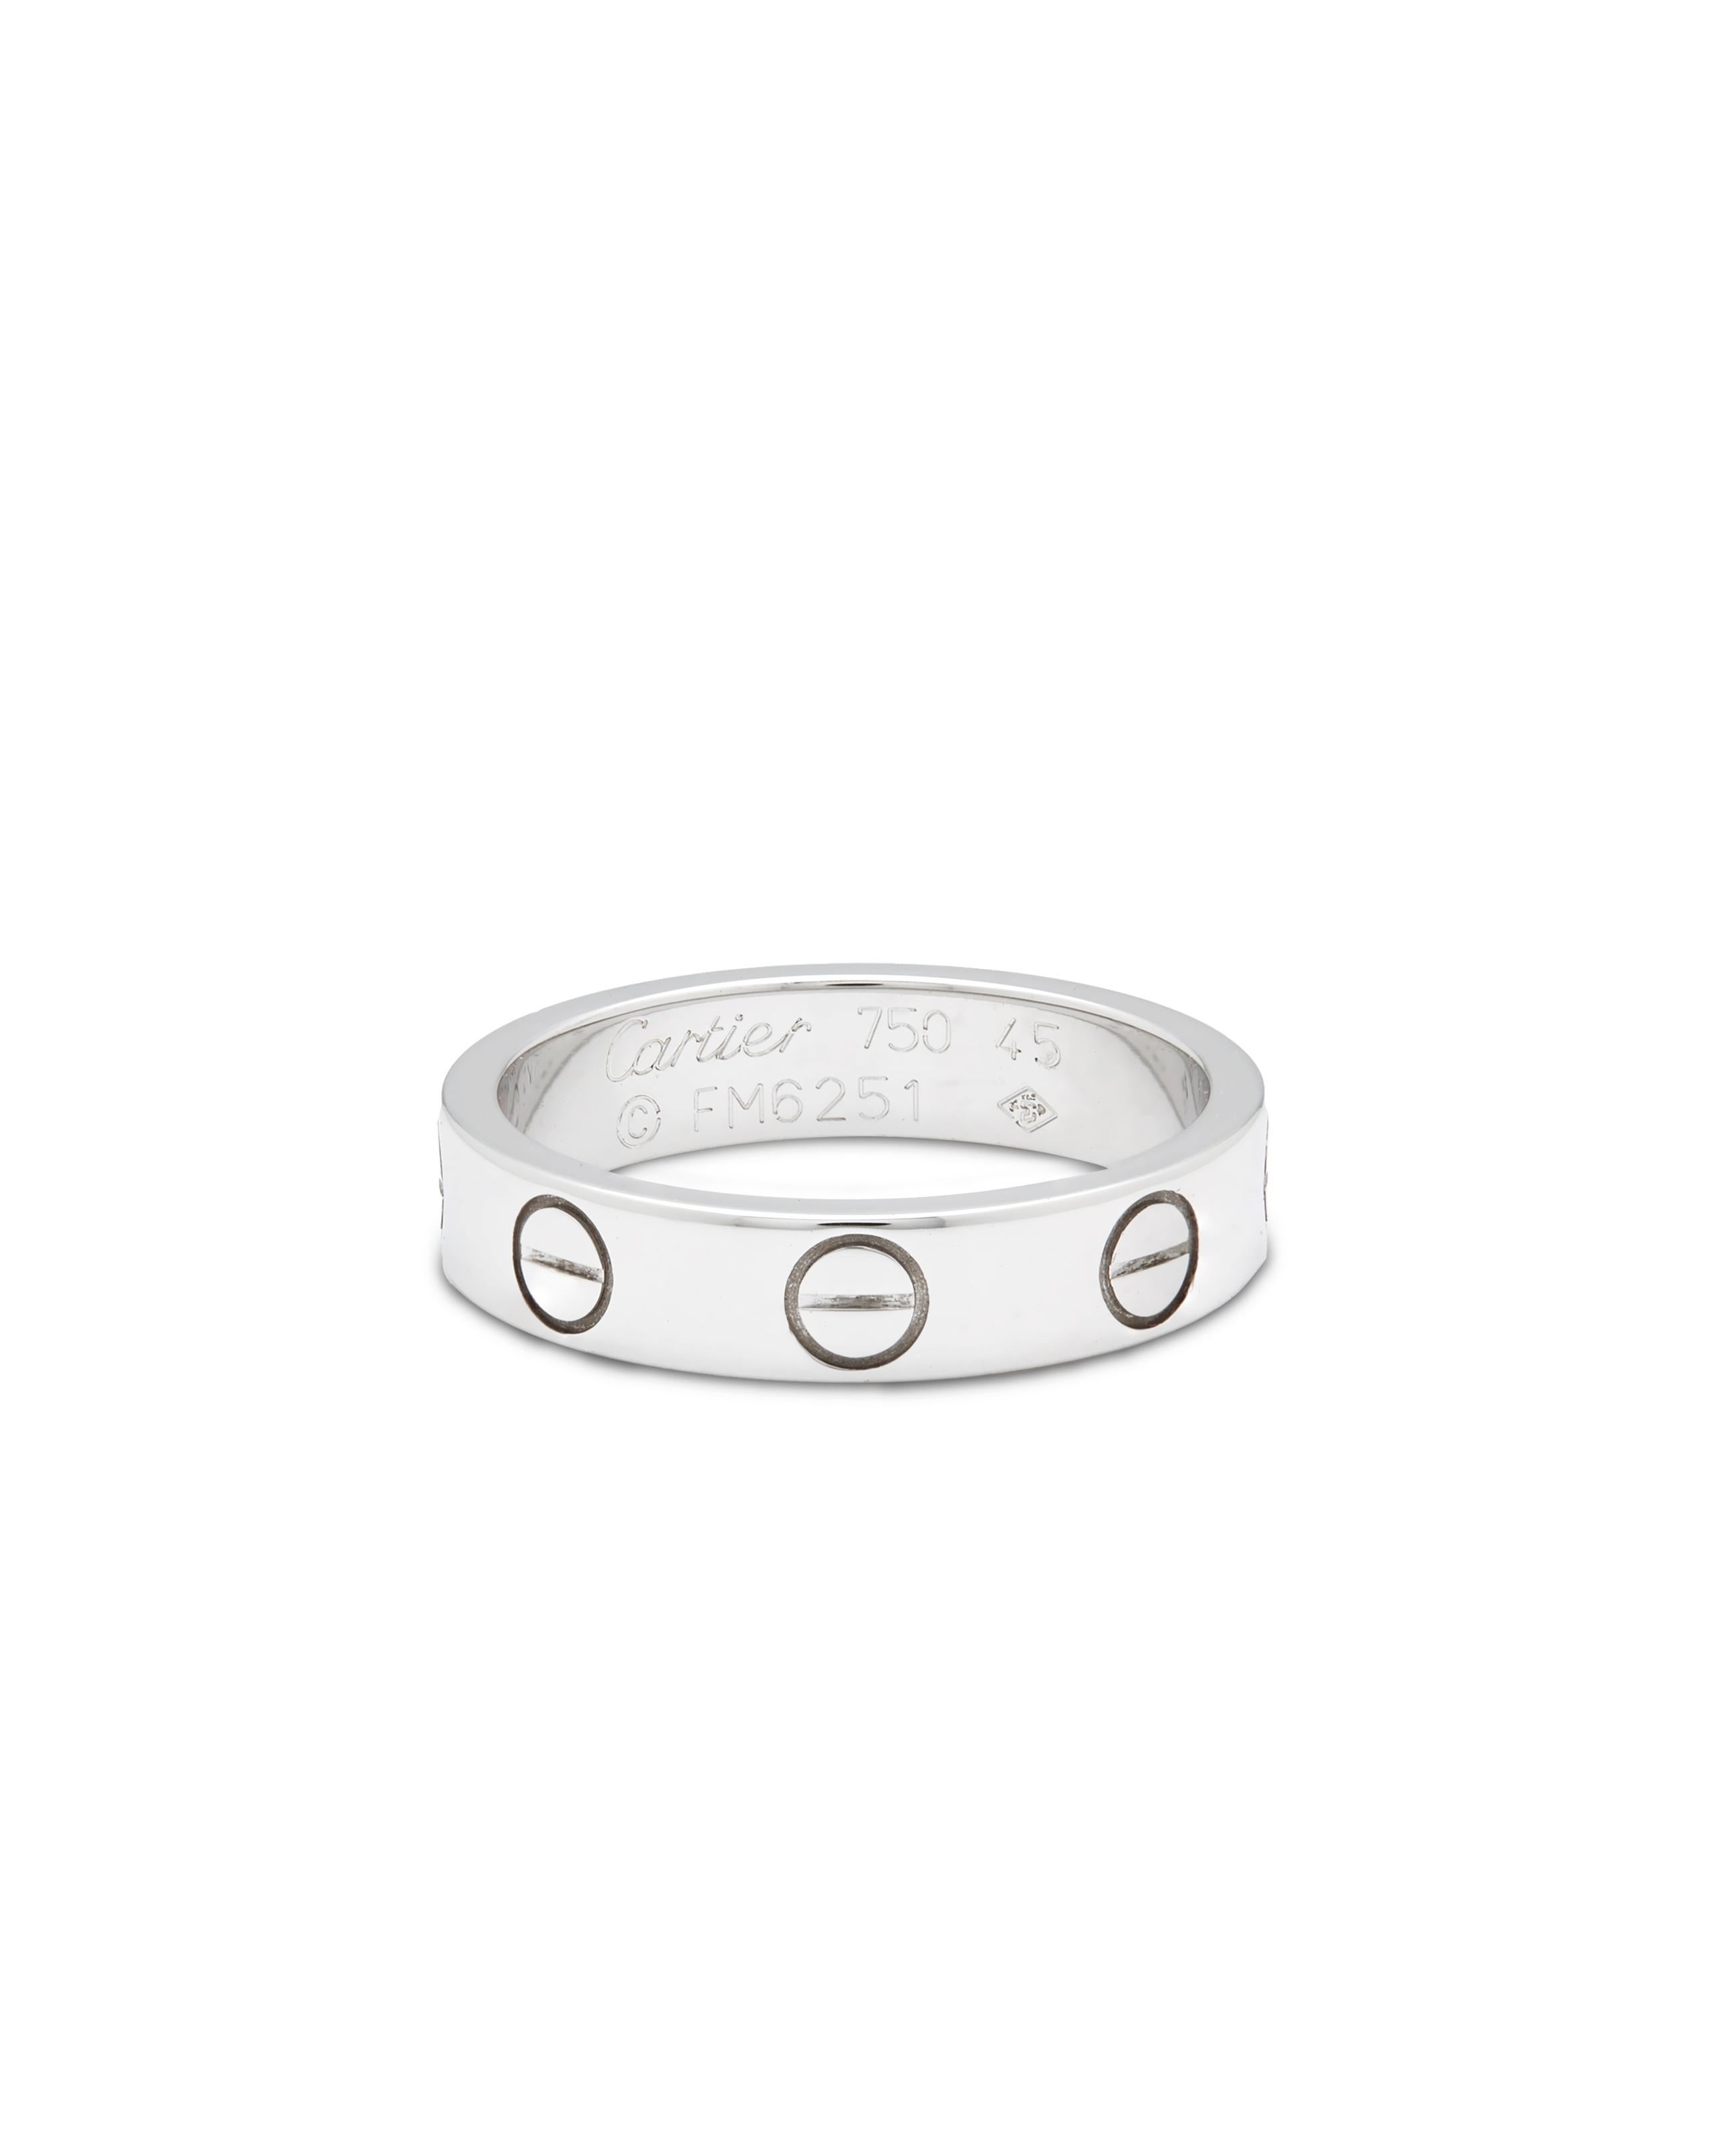 Cartier’s Iconic Love ring.

A symbol of inspired Love, and a must have for a discerning jewellery buyer. Perfect Gift to open in that beautiful red iconic box.  

Signed Cartier:
Stamped with makers marks 
Model number: B4085152
Stamped